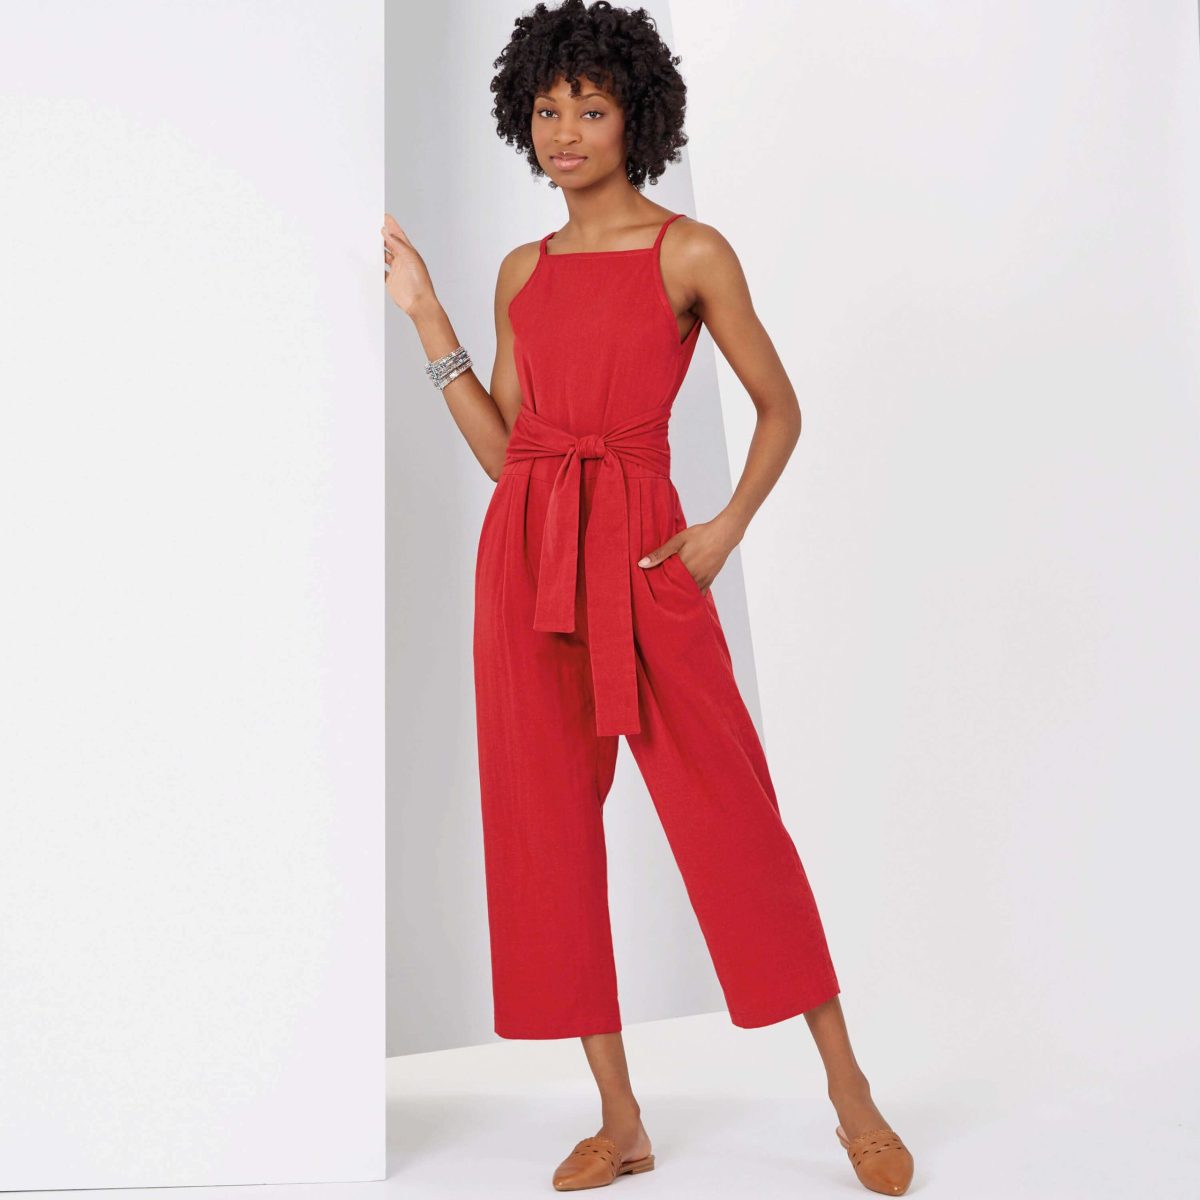 New Look Sewing Pattern N6616 Misses' Dress And Jumpsuit